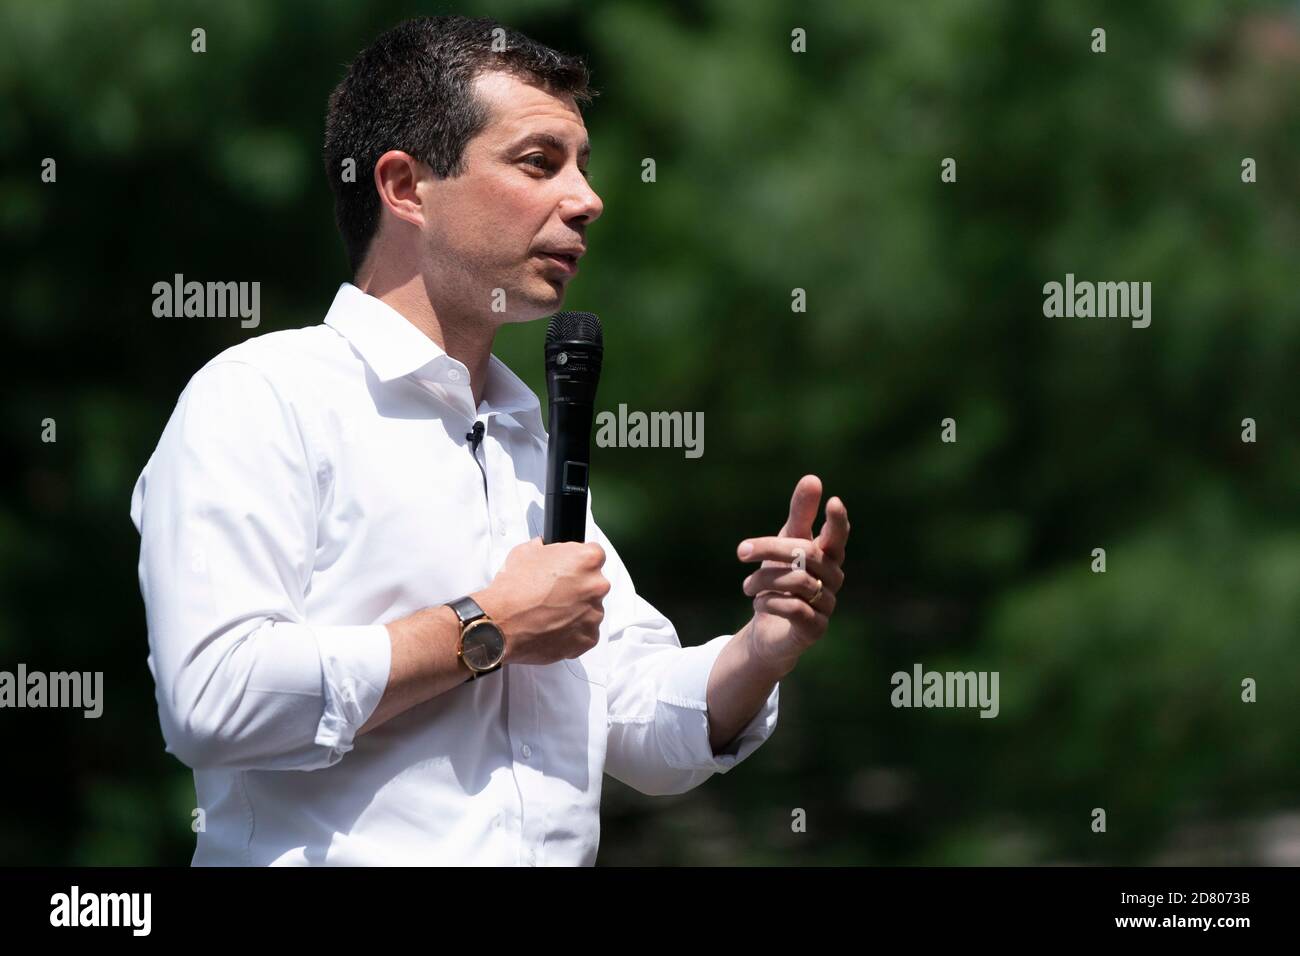 2020 Democratic Presidential hopeful, South Bend, Indiana Mayor, Pete Buttigieg speaks during a campaign event in Muscatine, Iowa on August 14, 2019. Buttigieg is campaigning in Iowa for the next two days discussing his plans to empower rural America. Credit: Alex Edelman/The Photo Access Stock Photo